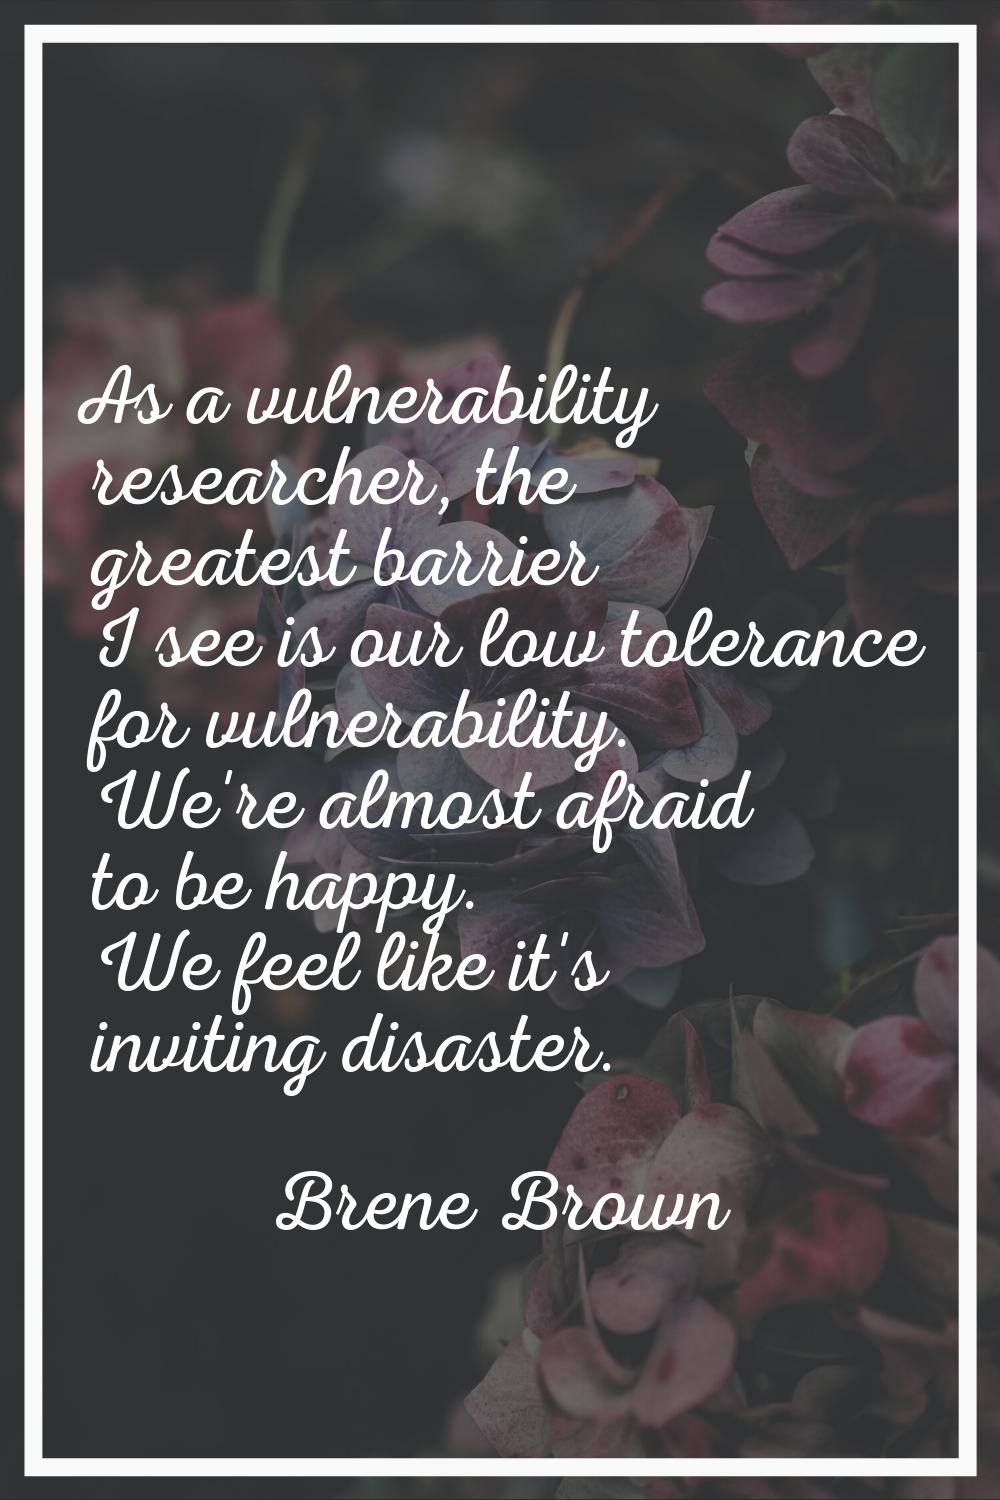 As a vulnerability researcher, the greatest barrier I see is our low tolerance for vulnerability. W